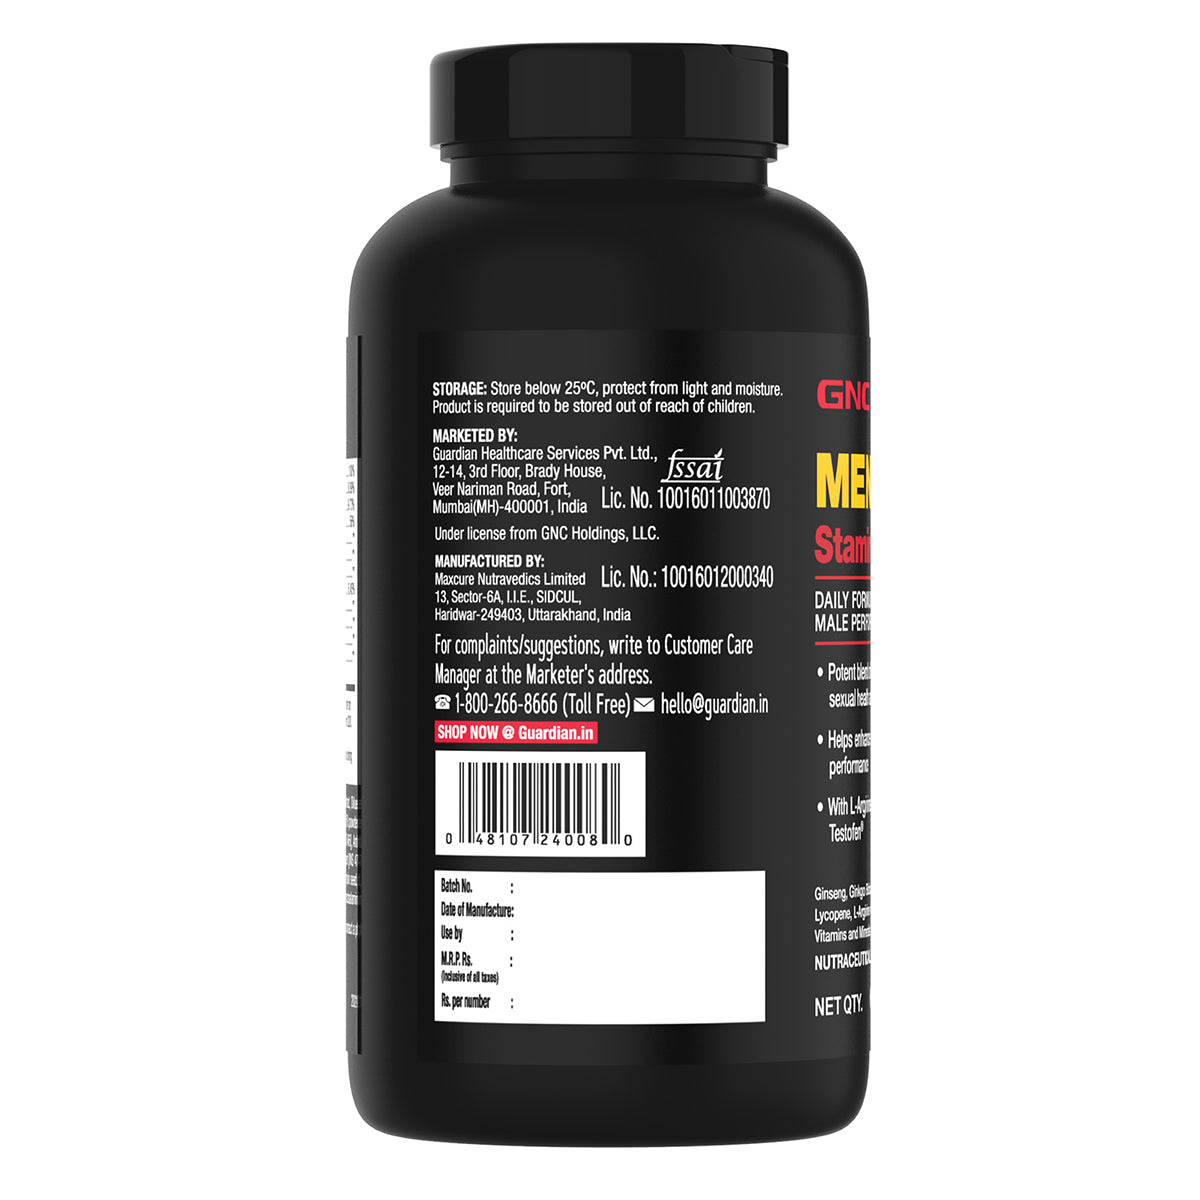 GNC Men's Staminol Max - Testosterone Booster for Long-Lasting Performance & Stamina - Free Fish Oil 1000mg